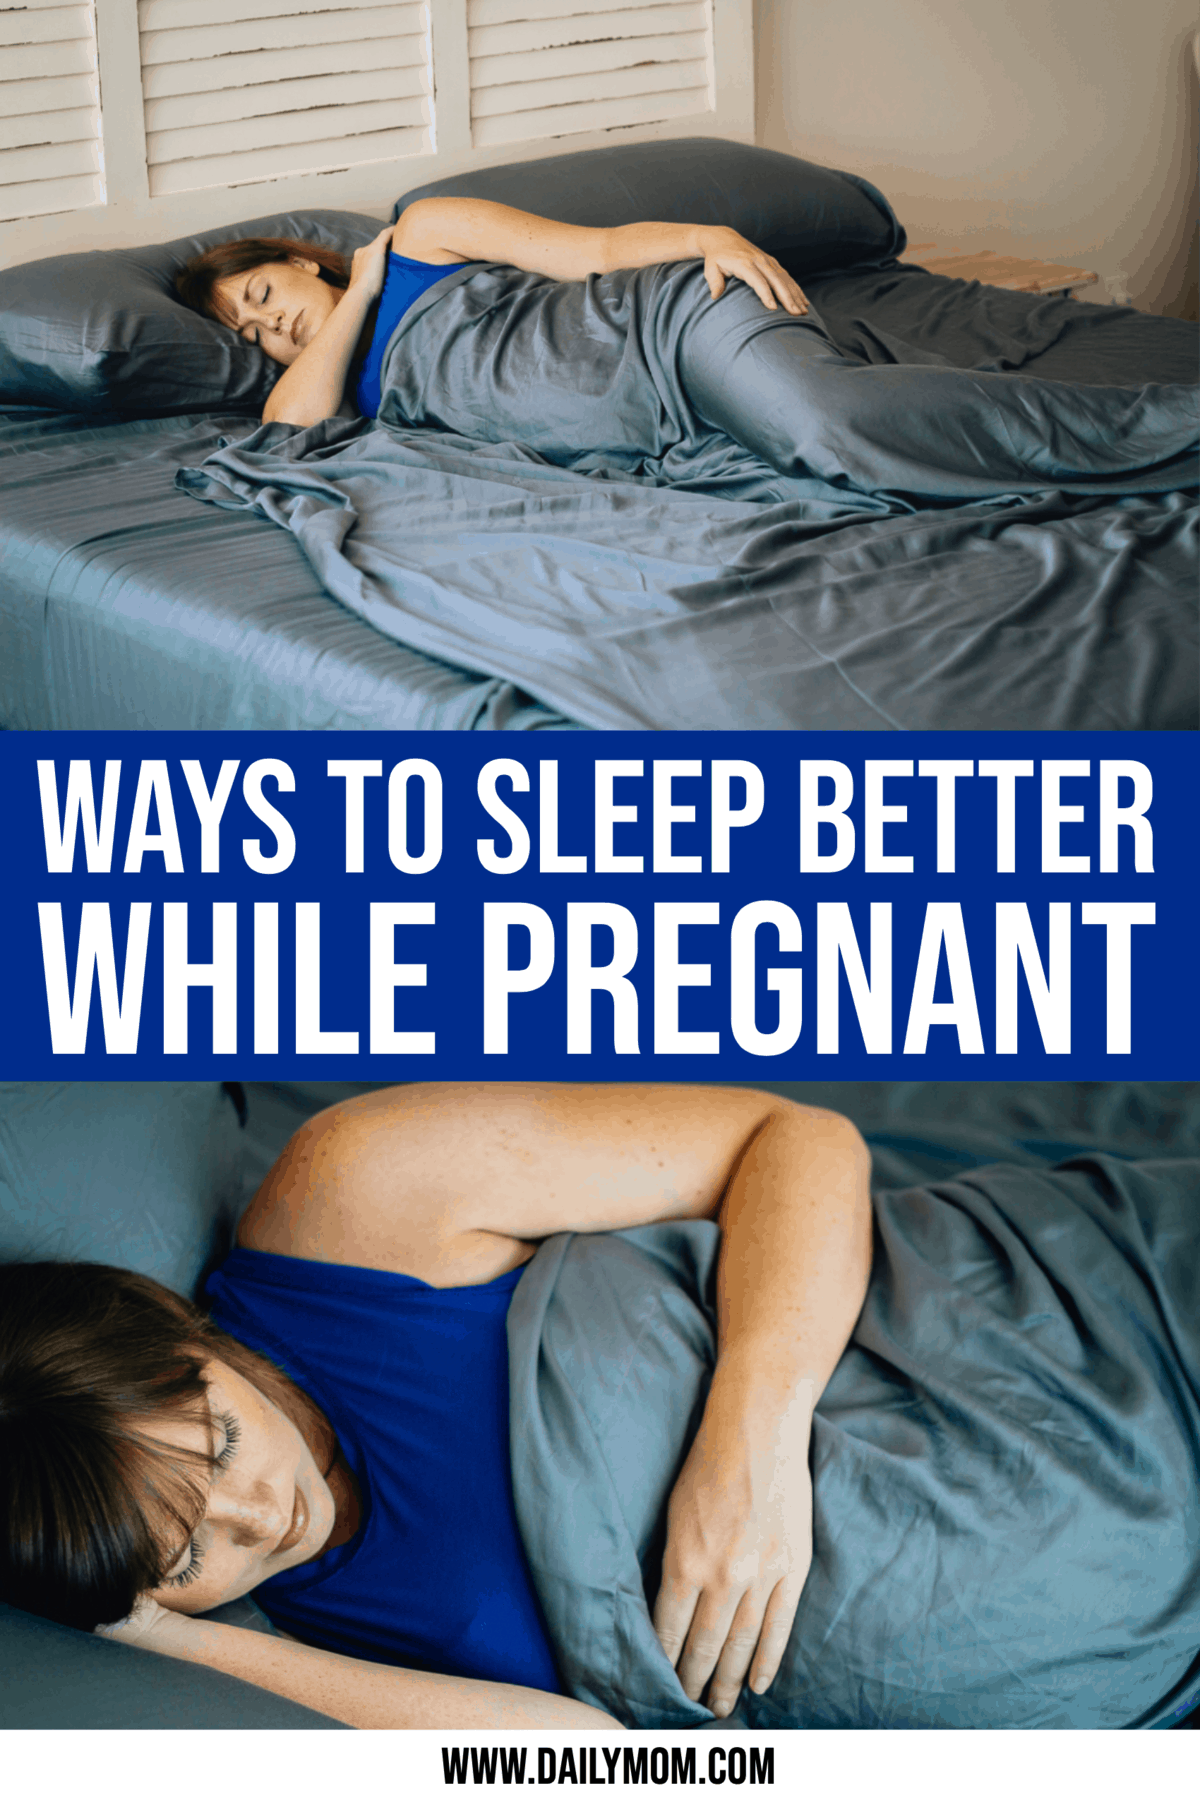 https://dailymom.com/portal/wp-content/uploads/2019/08/Sleep-Better-While-Pregnant-.png